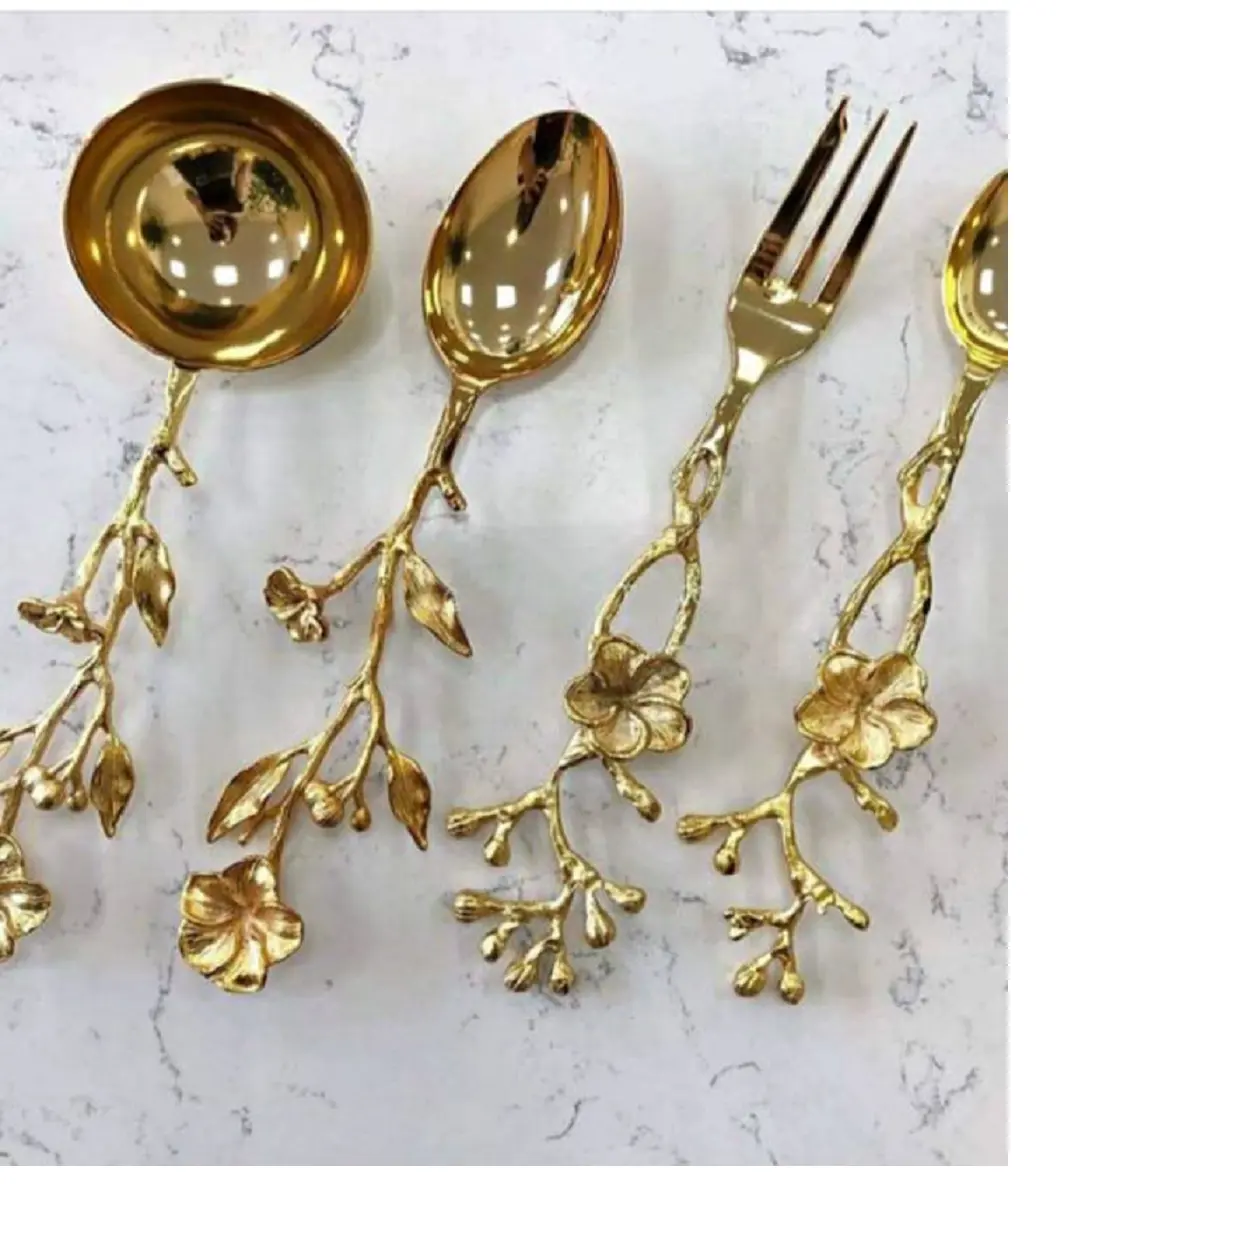 custom made brass cutlery sets including brass spoons,fork and knives in gold finish in leaf & floral design suitable for home.